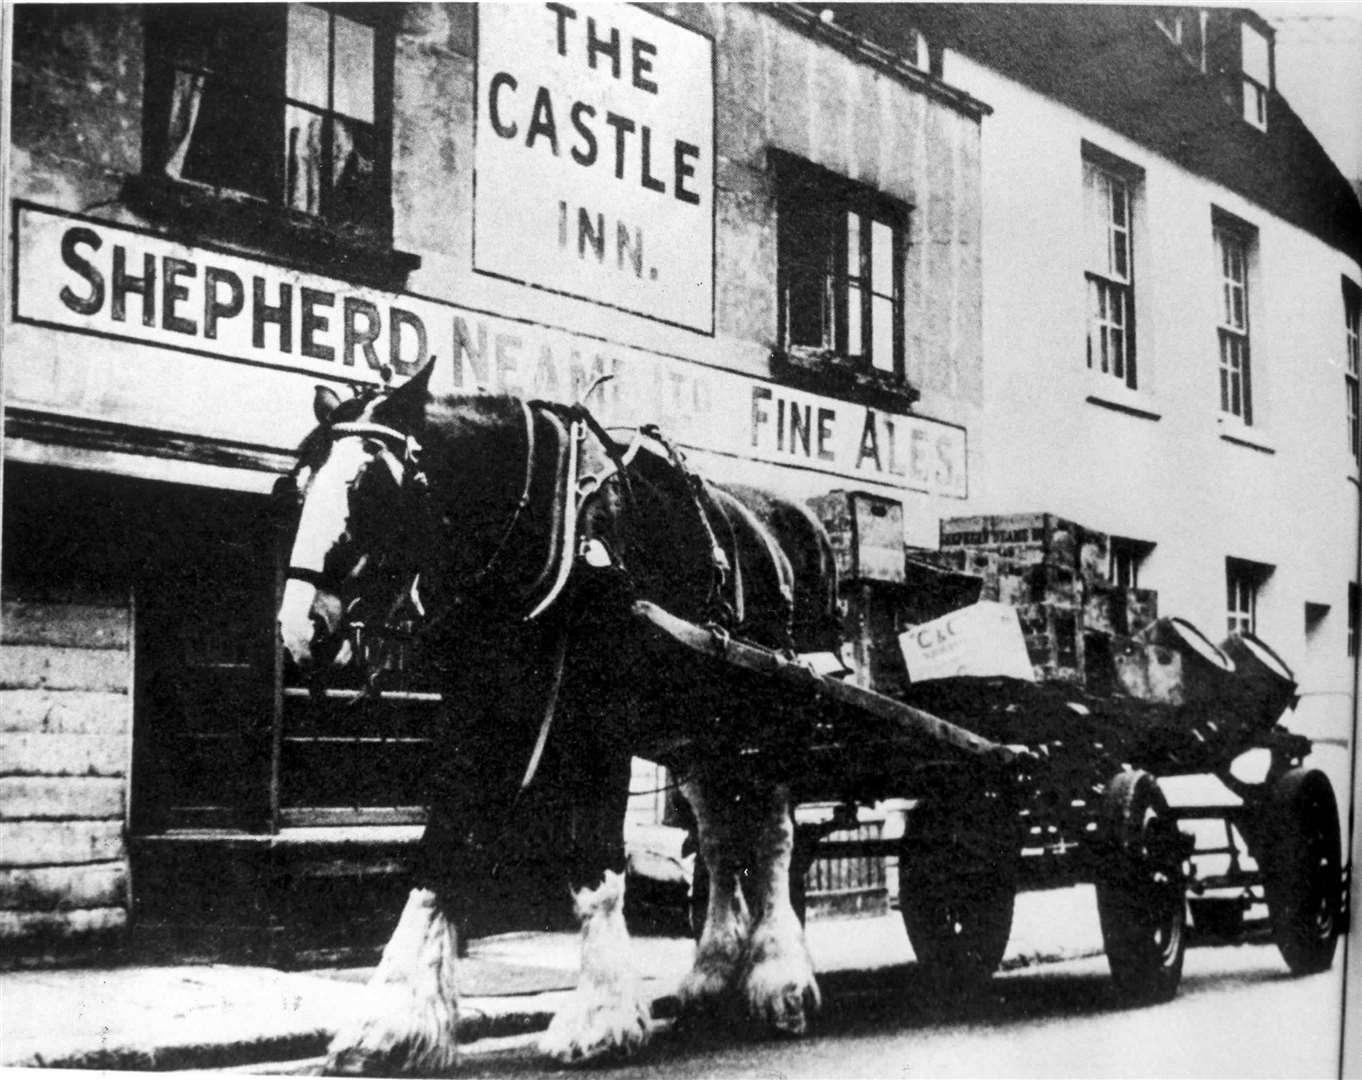 Shepherd Neame continued to use horses for deliveries for many years as well as using motor transport. The horse era ended at the brewery in 1968. Charlie, the last of the dray horses, appears in this picture taken in 1963 outside the Caslte Inn in West Street, Faversham